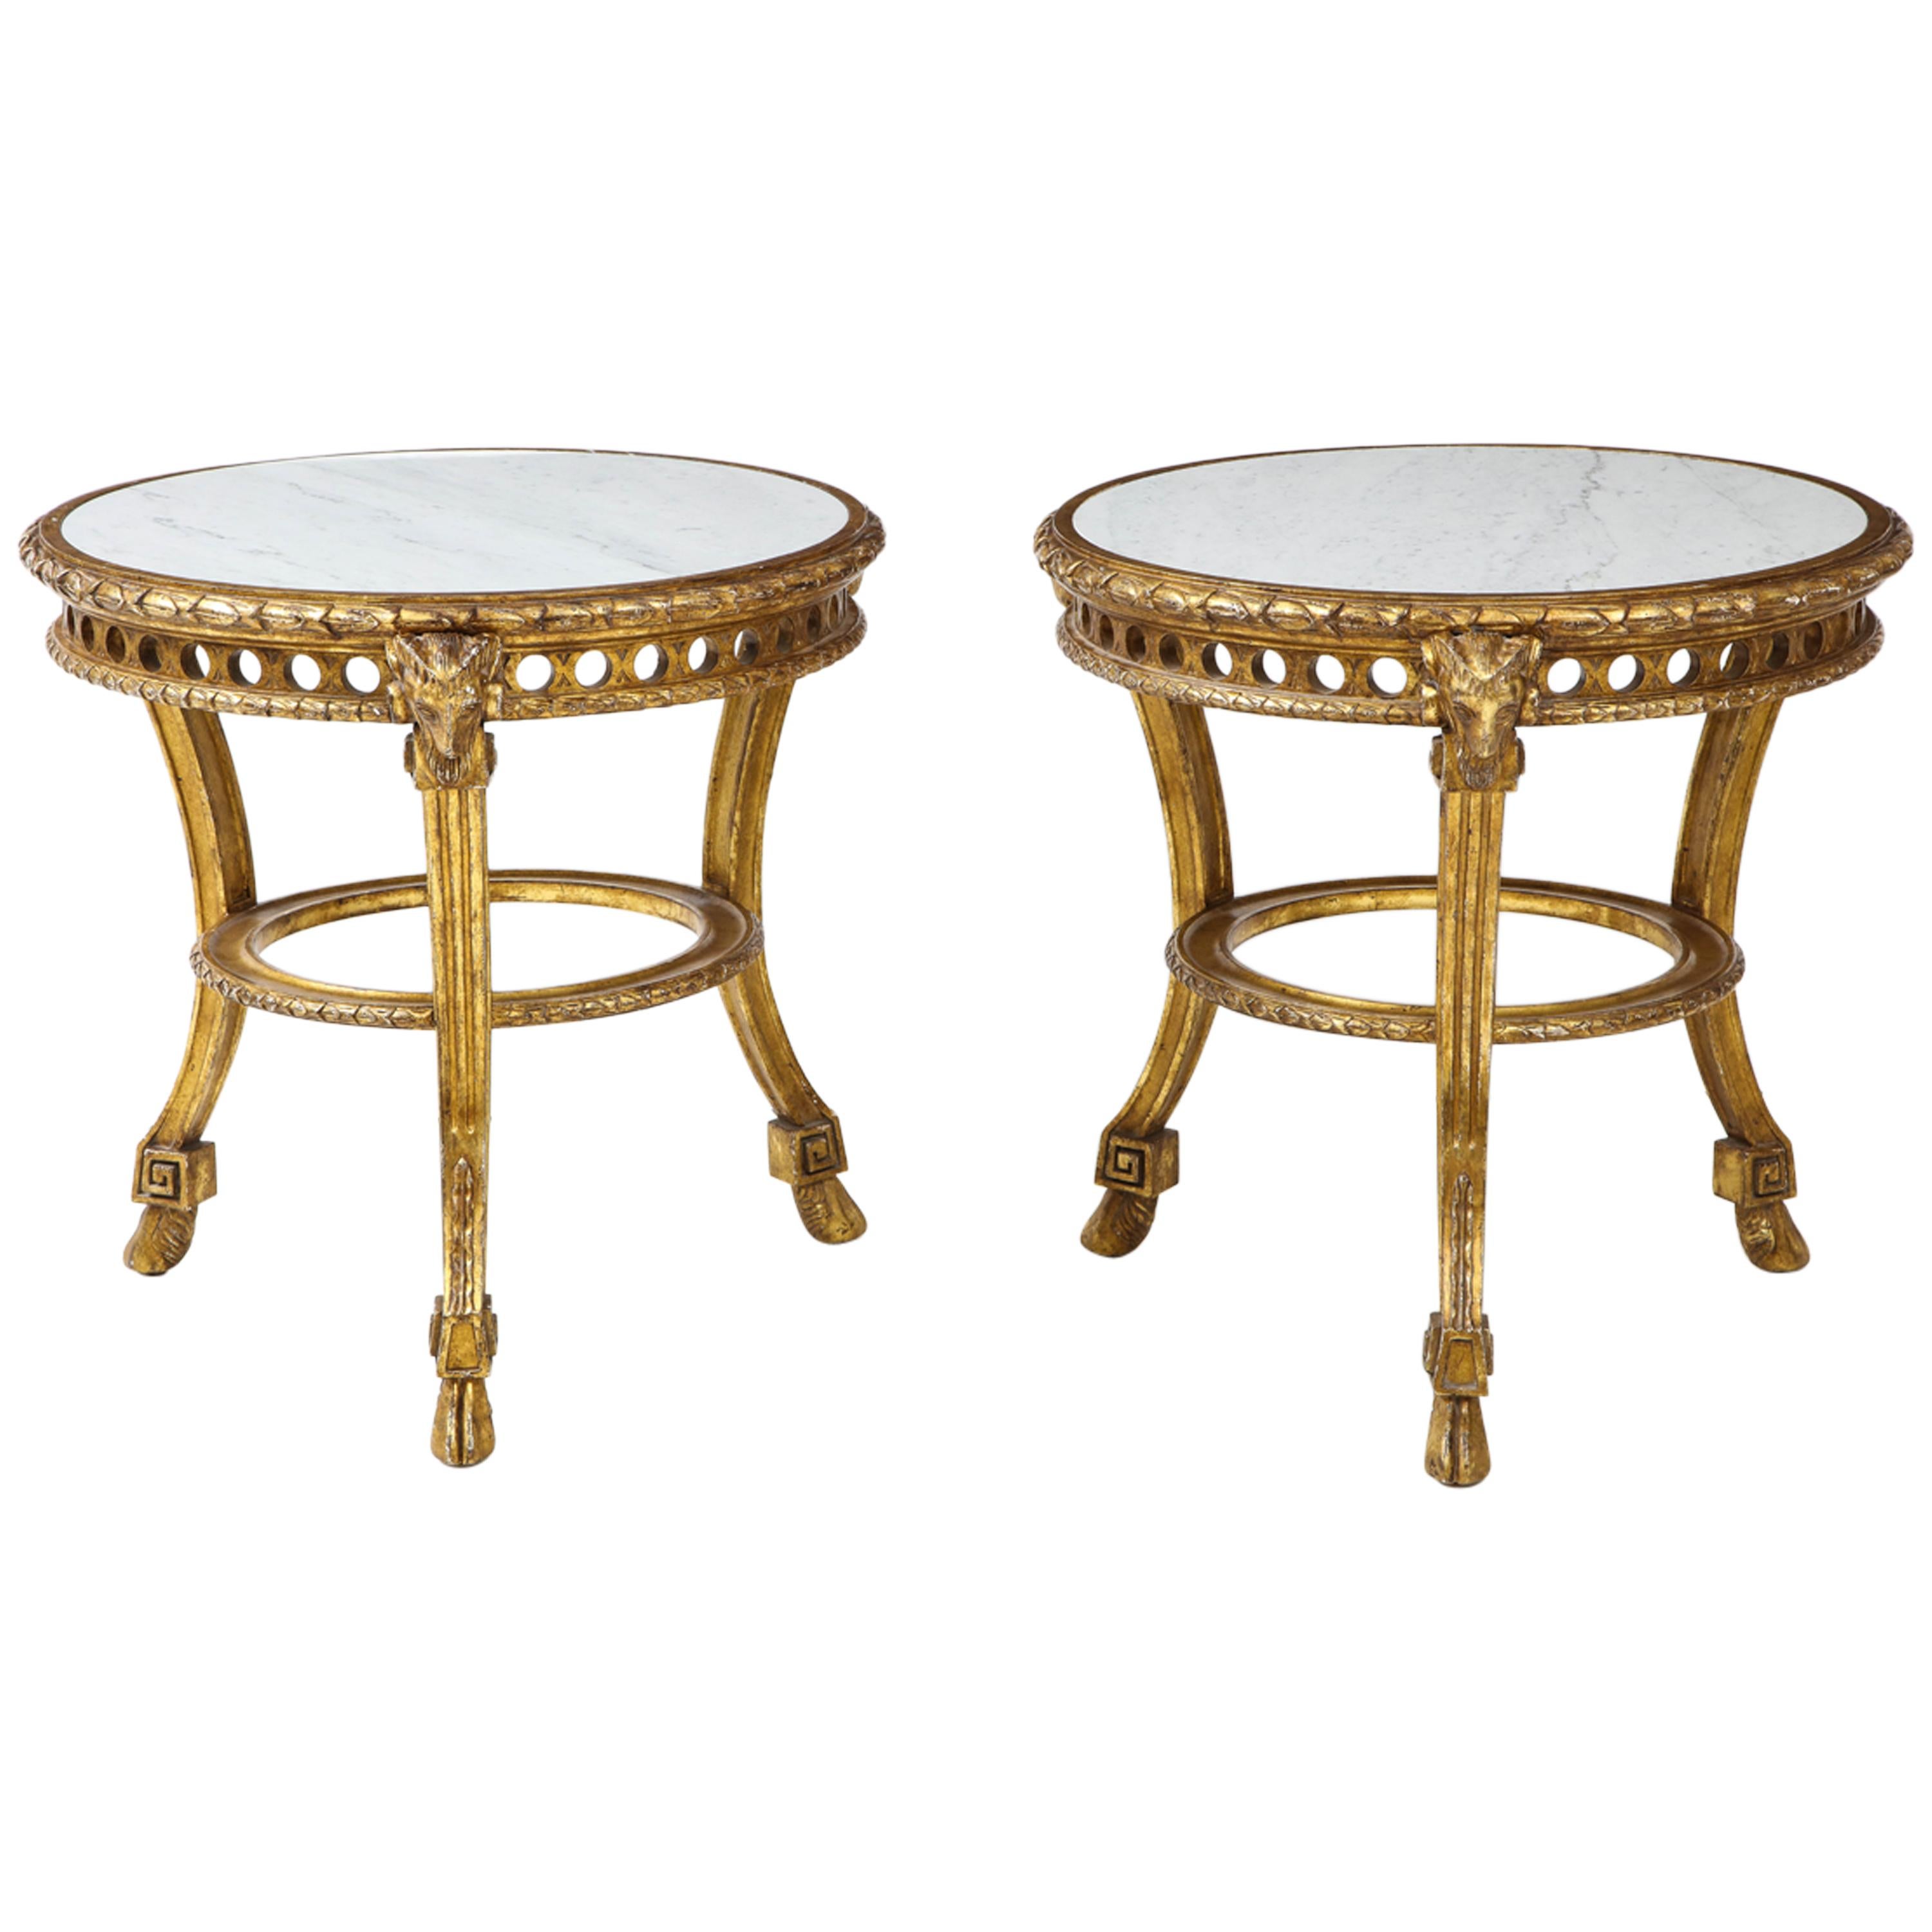 Pair of French Giltwood and Marble Guéridons